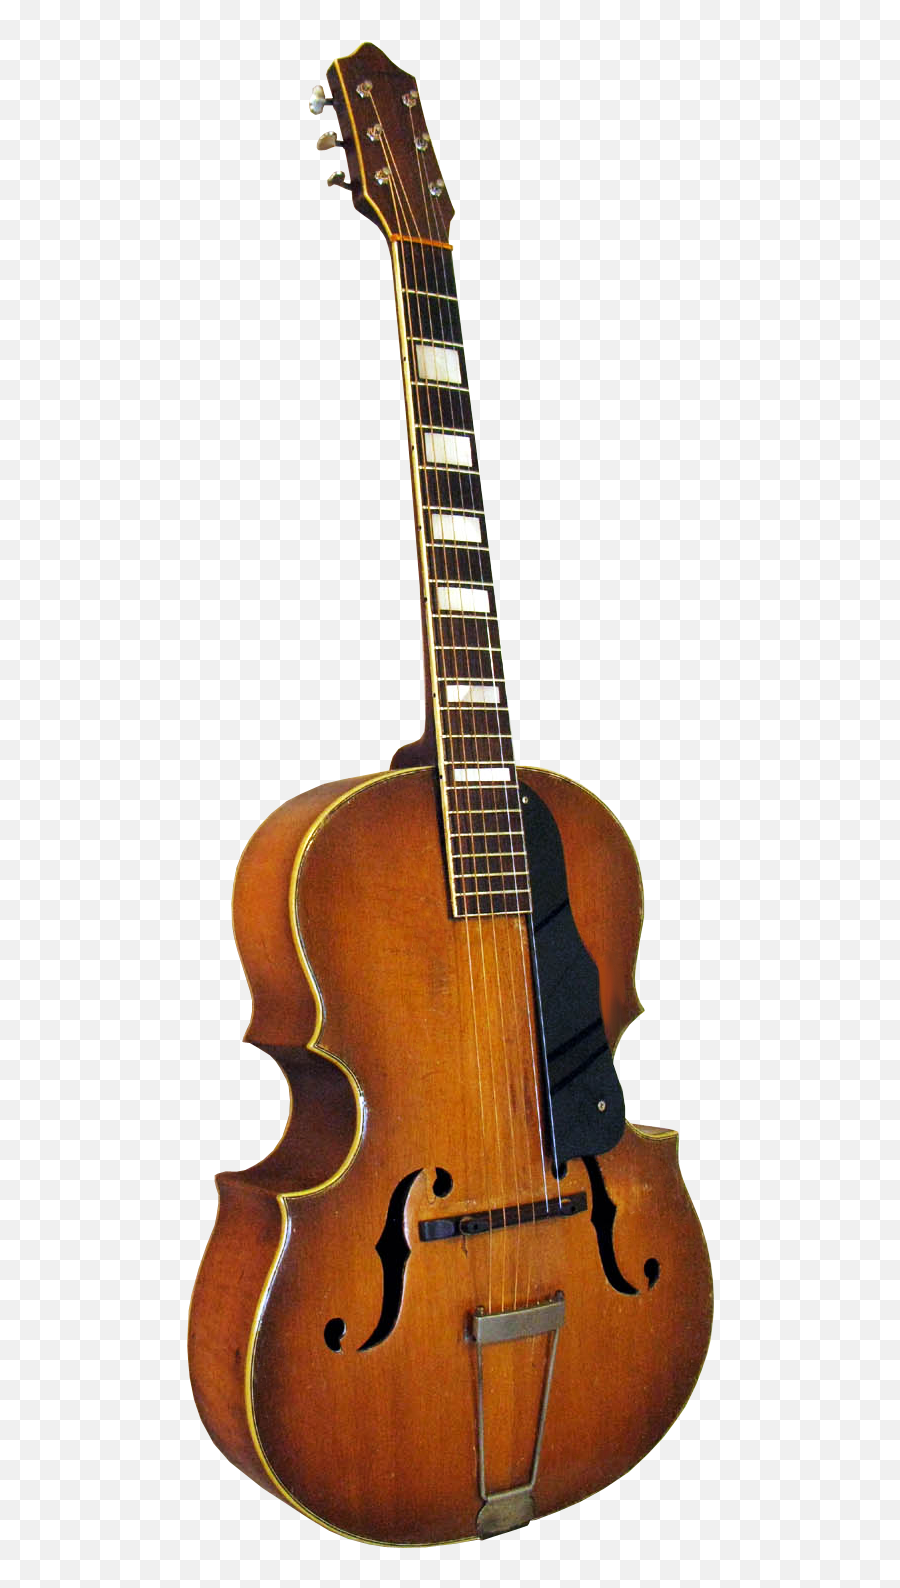 Cello Guitar Vintage Musical Instrument Free Png Images - Cello Guitar,Cello Png